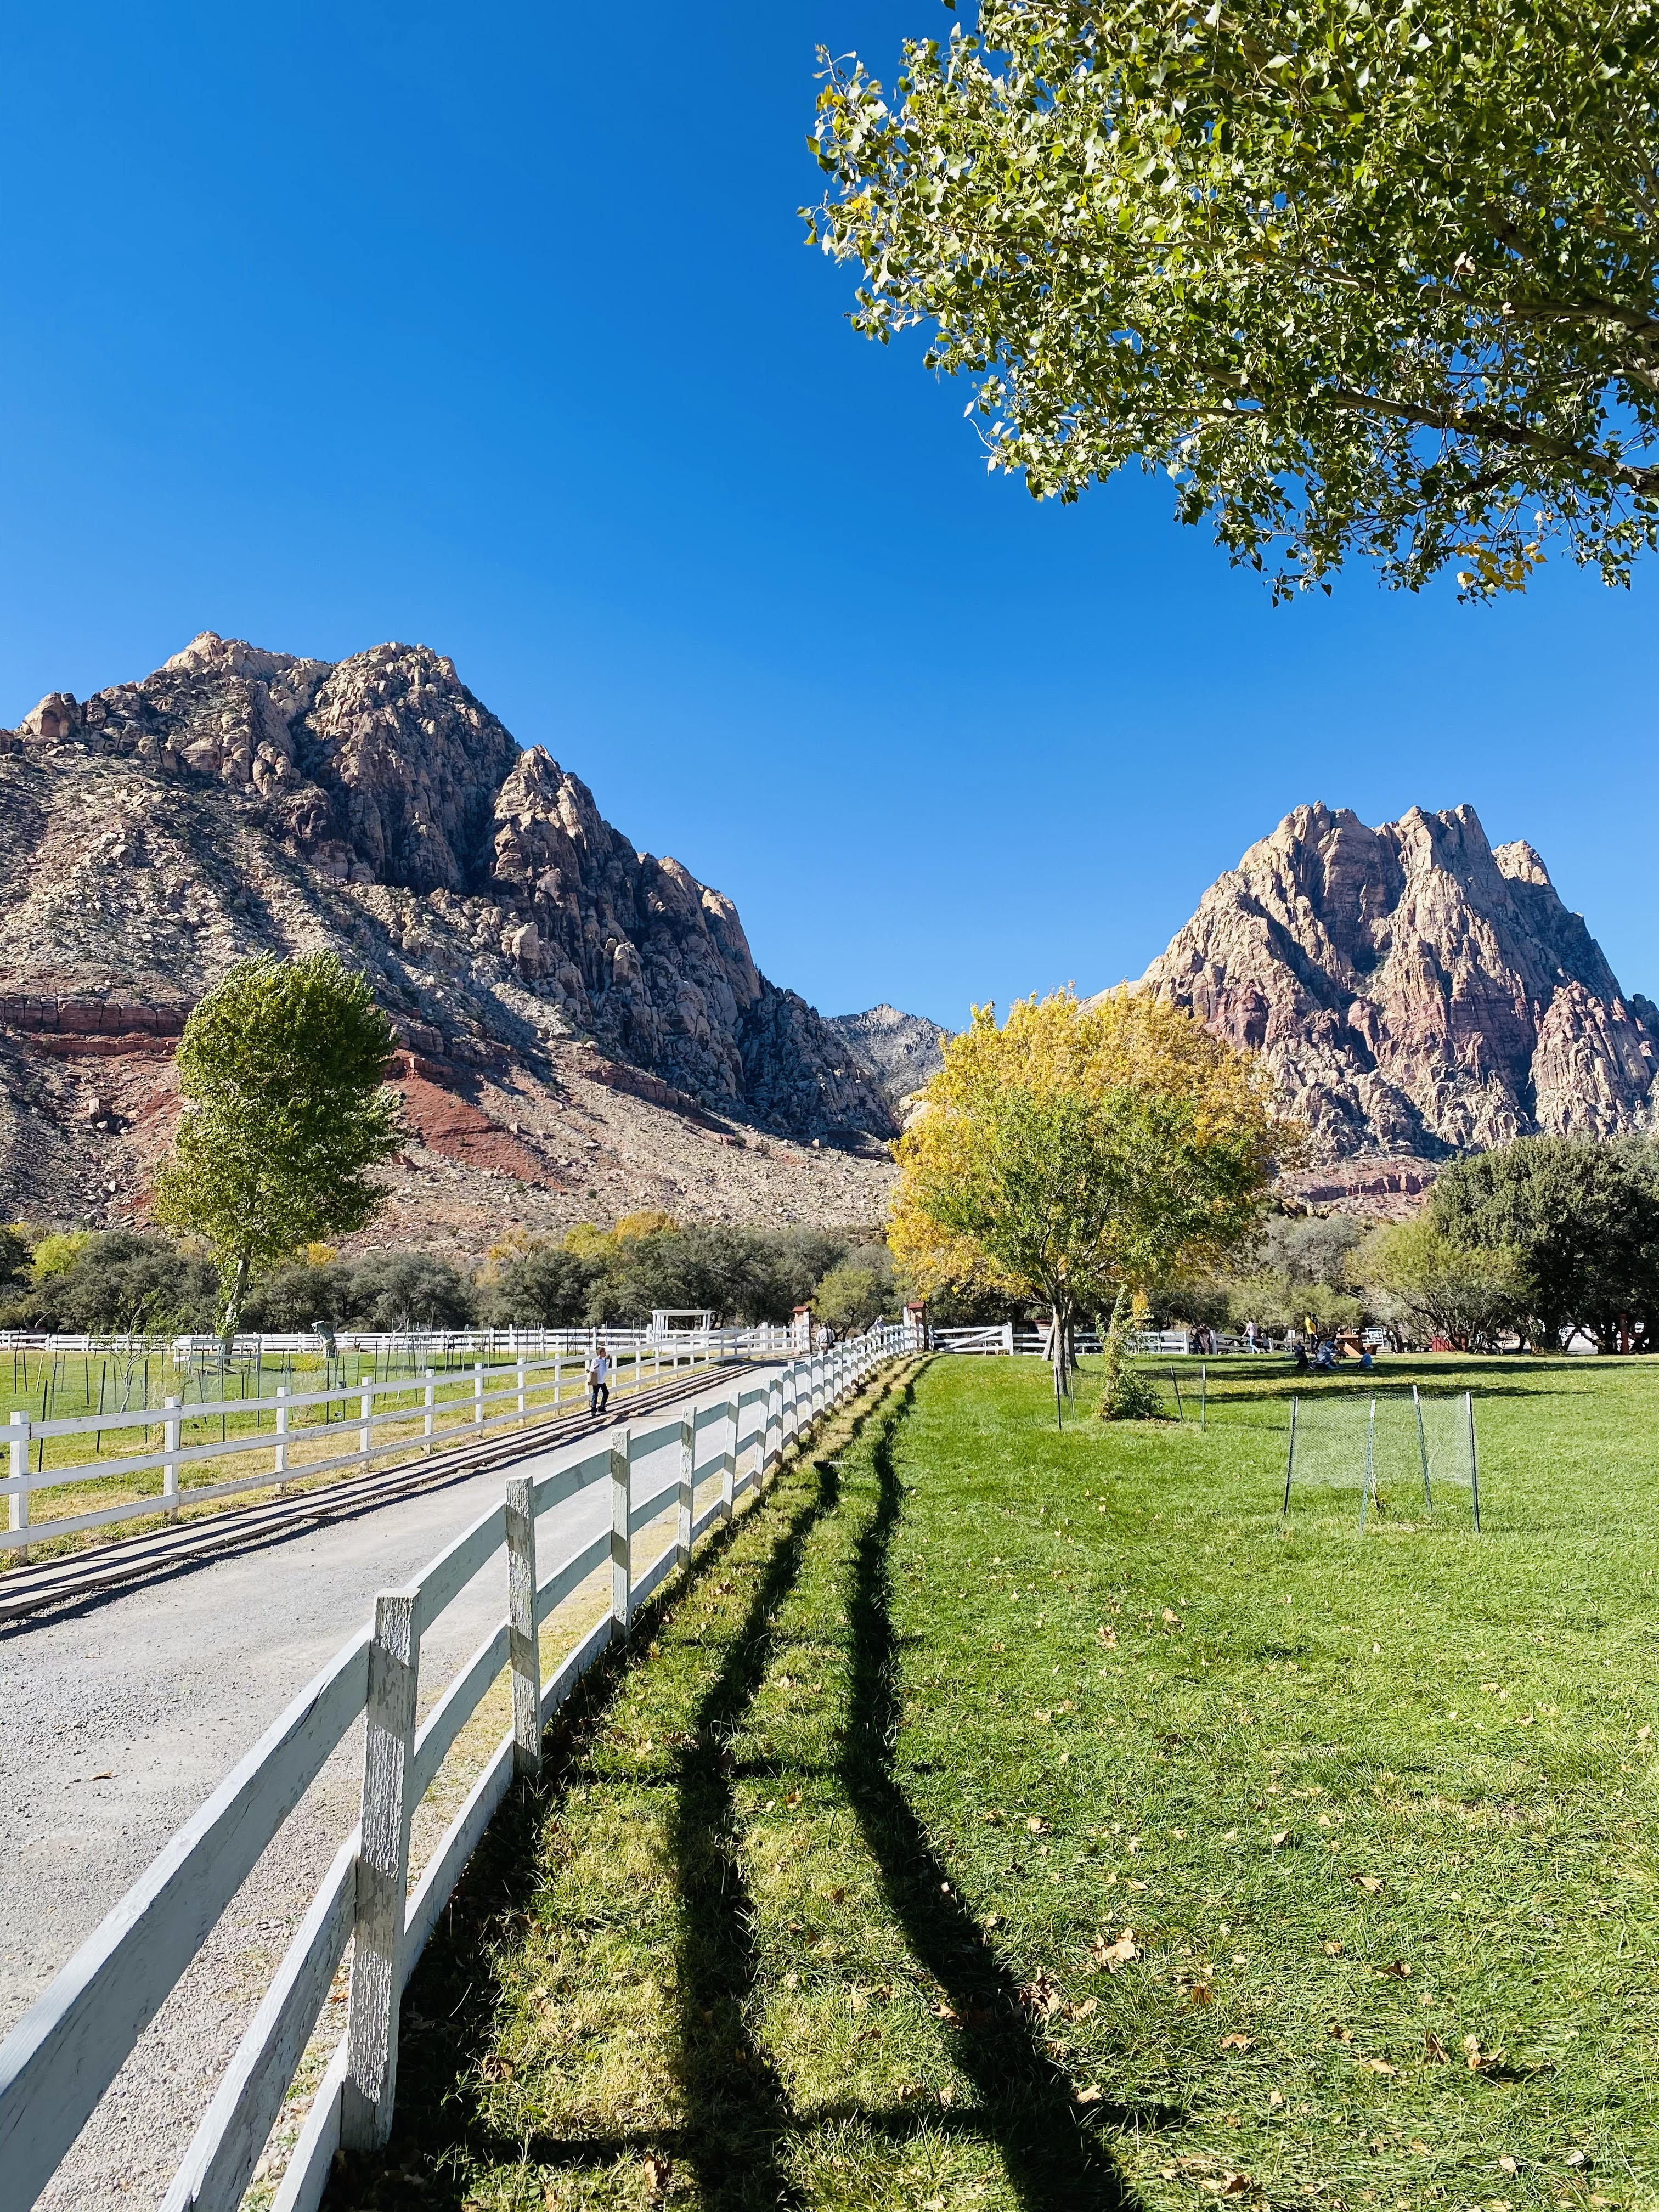 Spring Mountain Ranch State Park is an awesome activity when you are traveling to Las Vegas with kids. This park you will not believe is only 30 minutes outside of the Las Vegas Strip